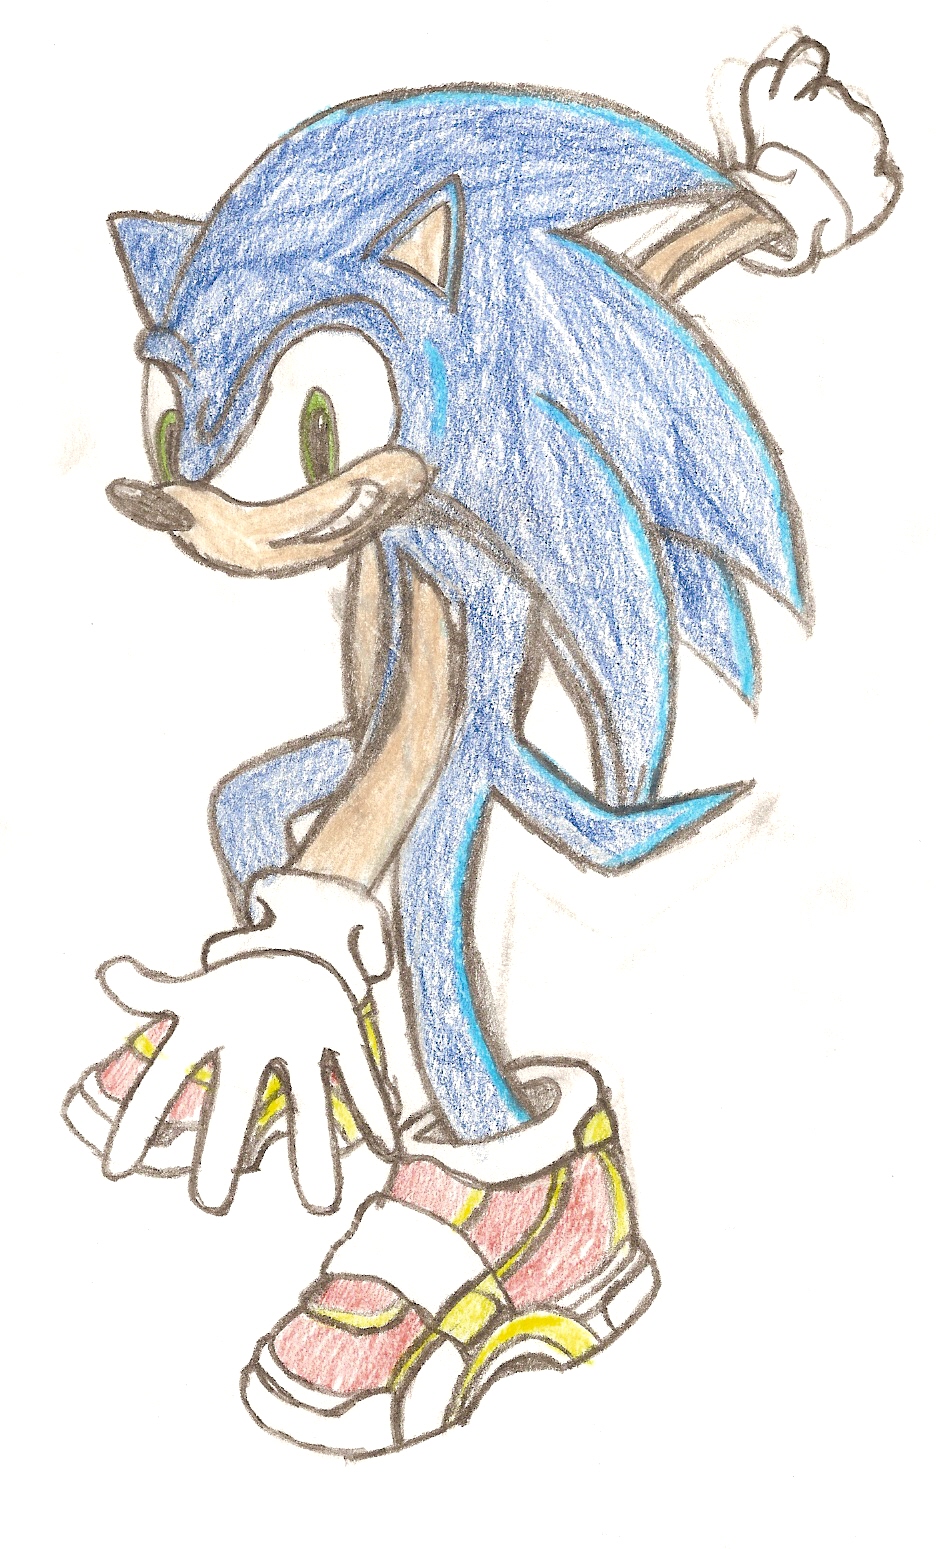 request 4 sonicbabe5 by twistedsoul_13